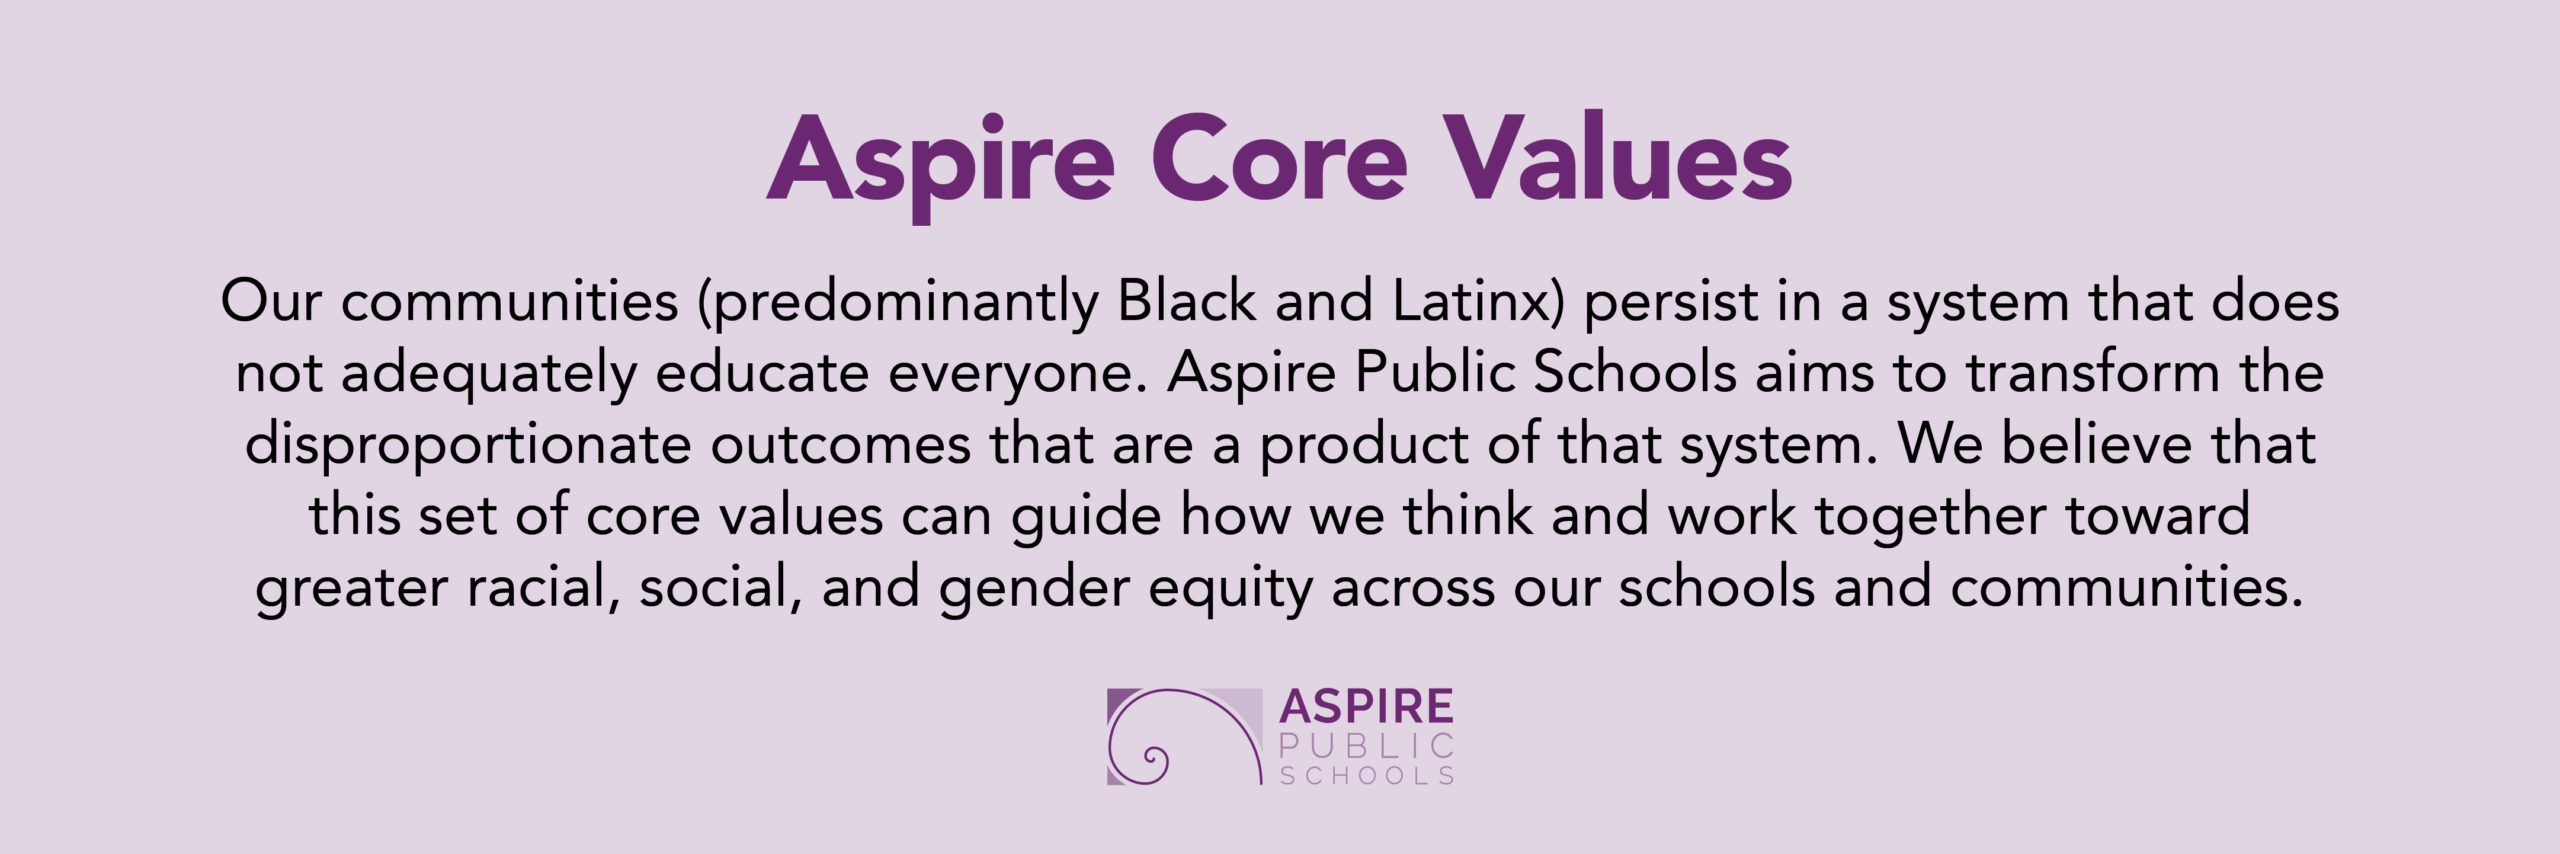 Core Values' purpose statement with logo and title.